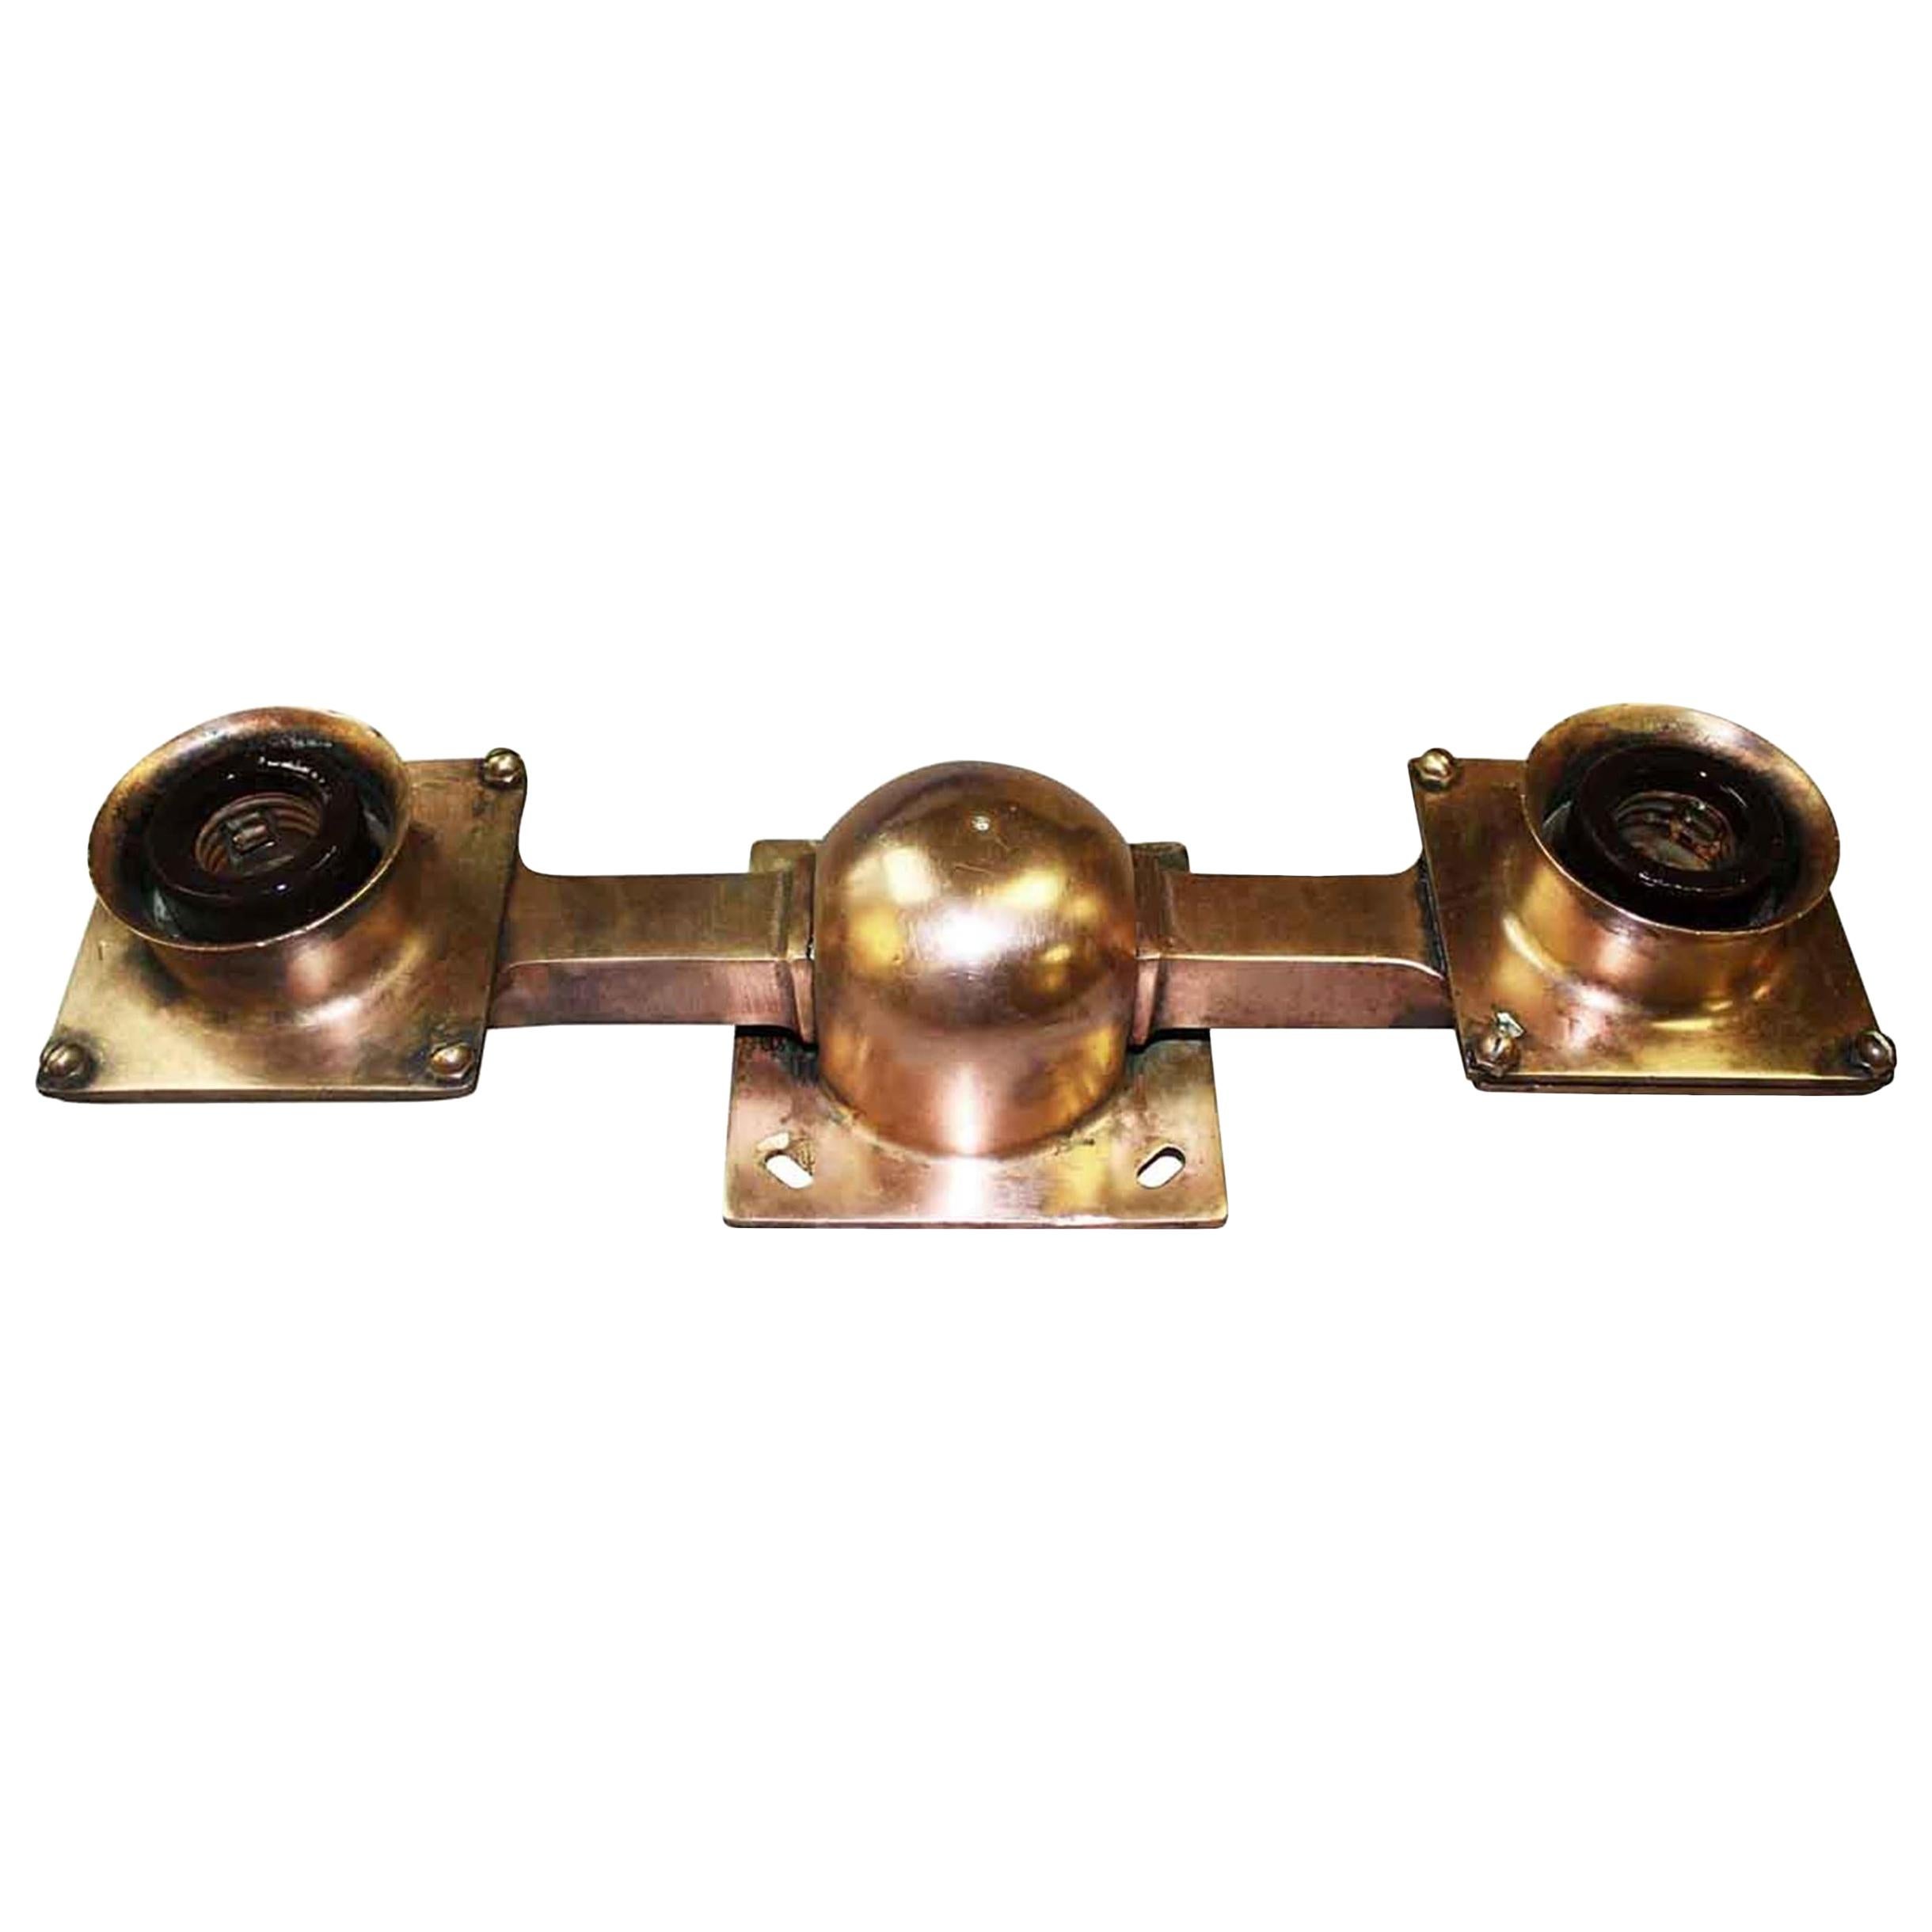 NYC Copper Plated Brass Subway Headed Subway Light For Sale